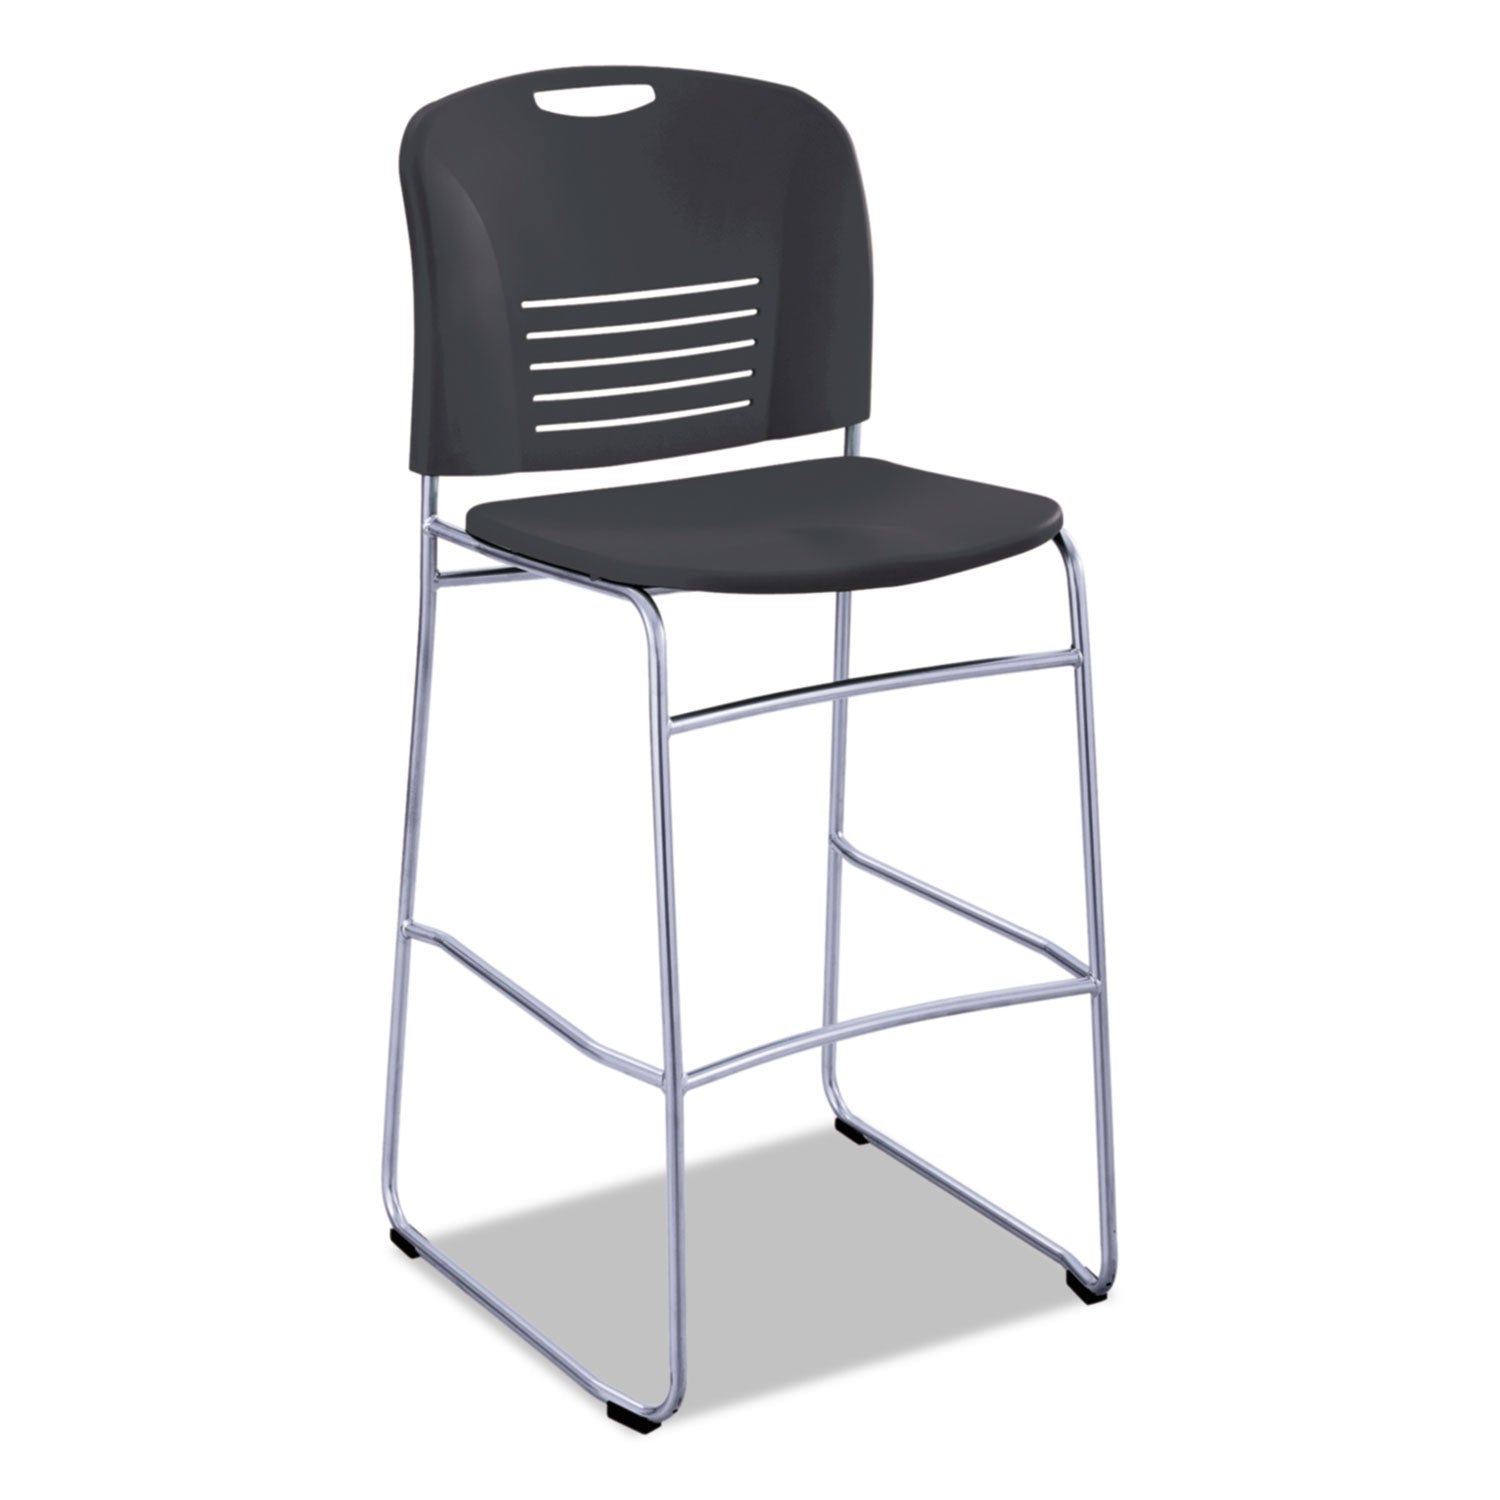 Vy Sled Base Bistro Chair, Supports Up to 350 lb, 30.5" Seat Height, Black Seat, Black Back, Silver Base - 